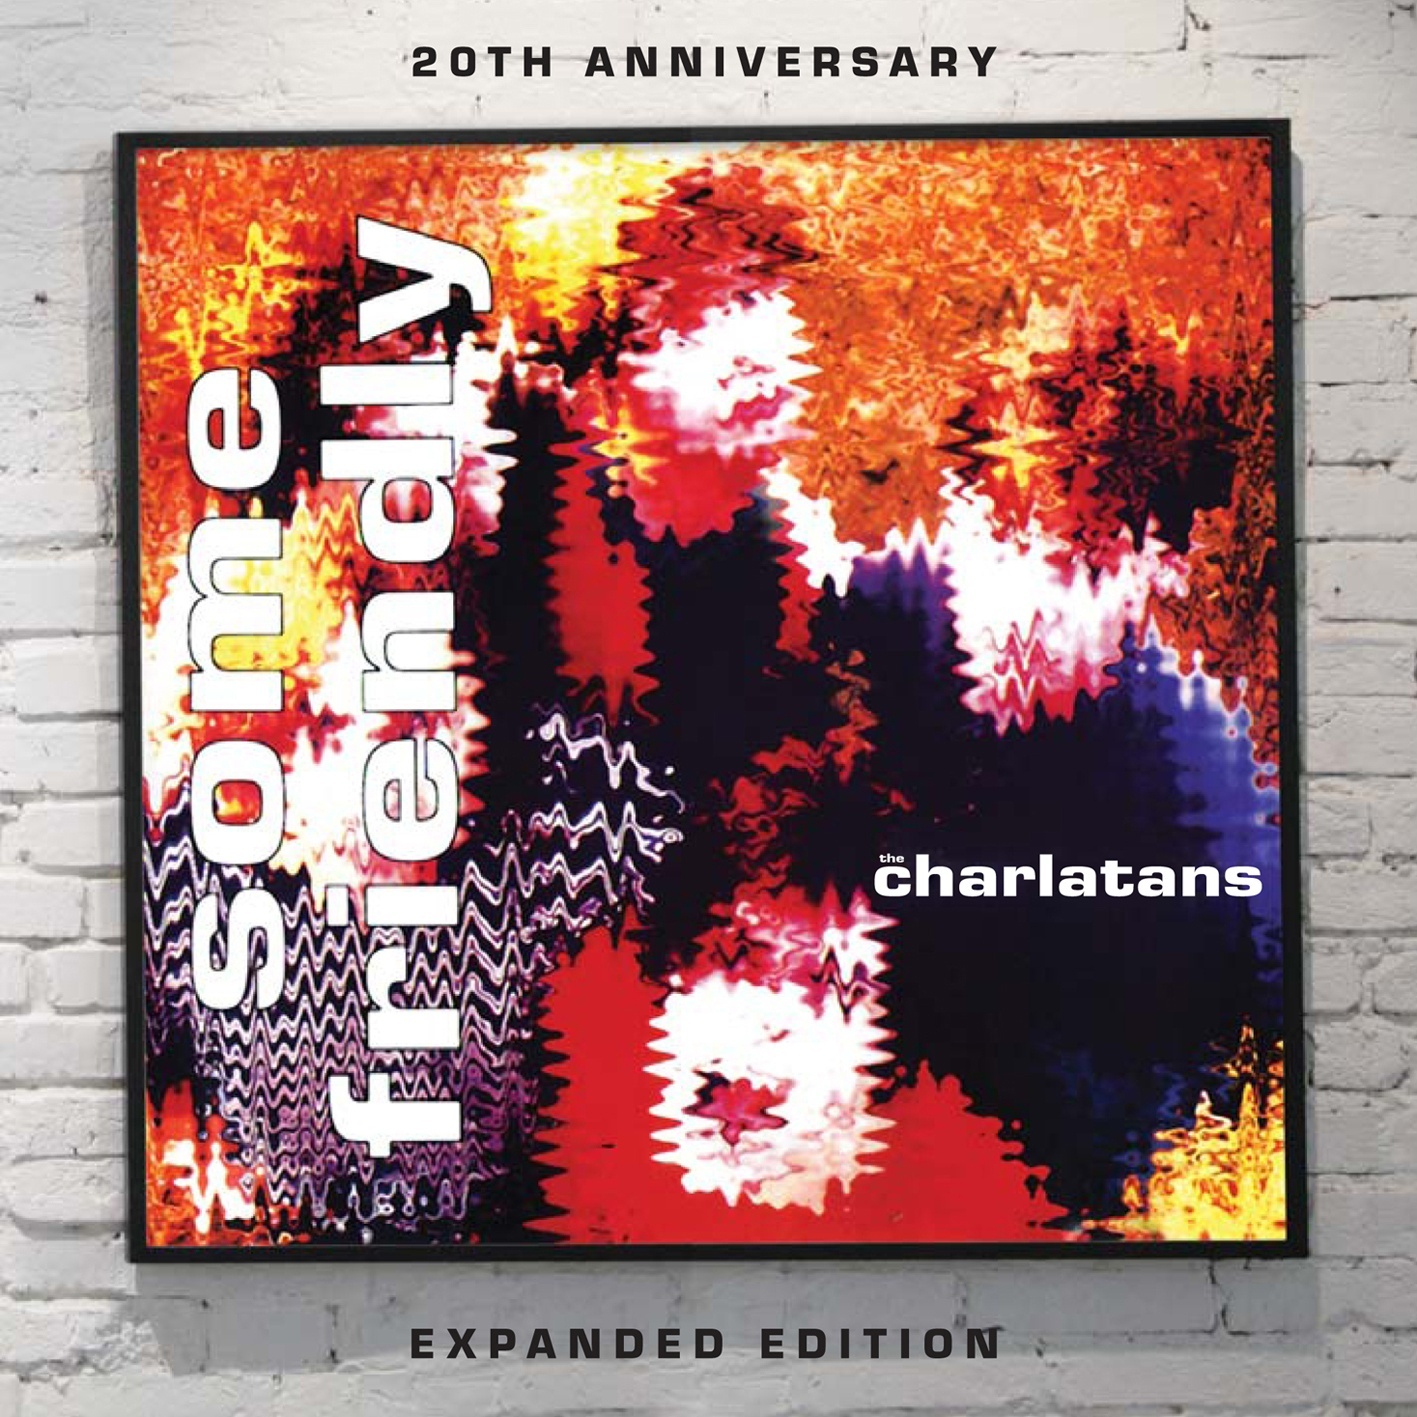 The Charlatans - Some Friendly (Expanded Edition) - 2xCD